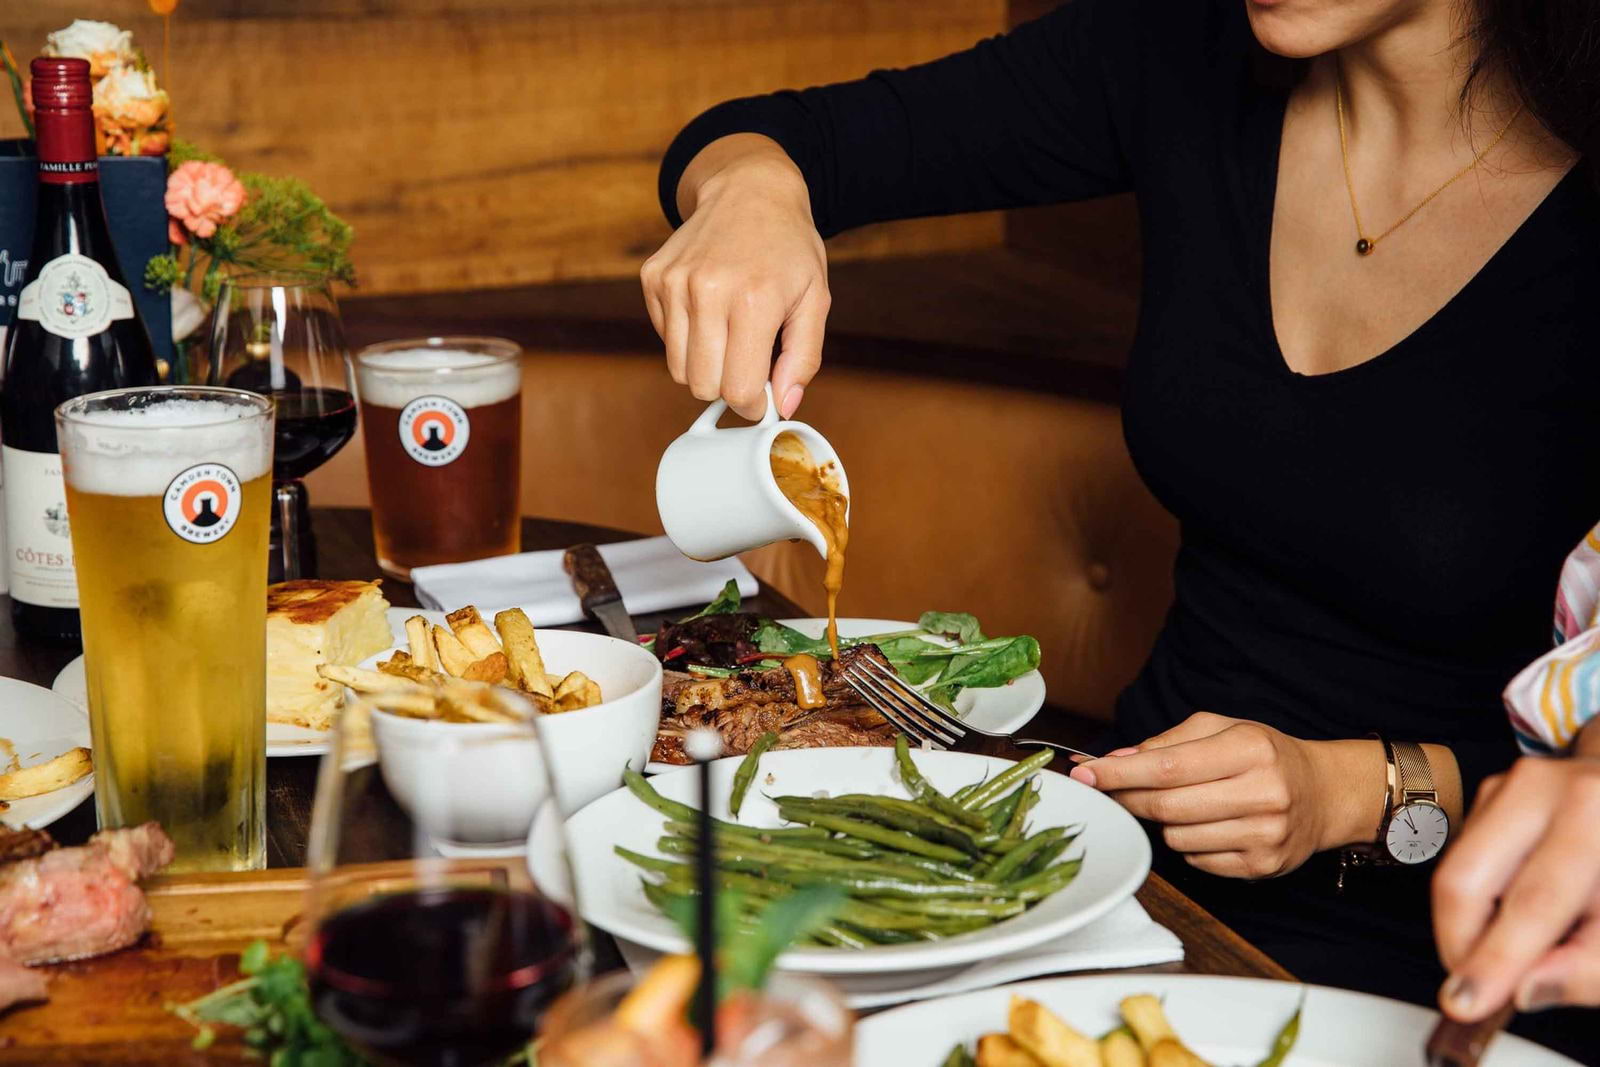 Get 50% off food at The Horseshoe Hampstead